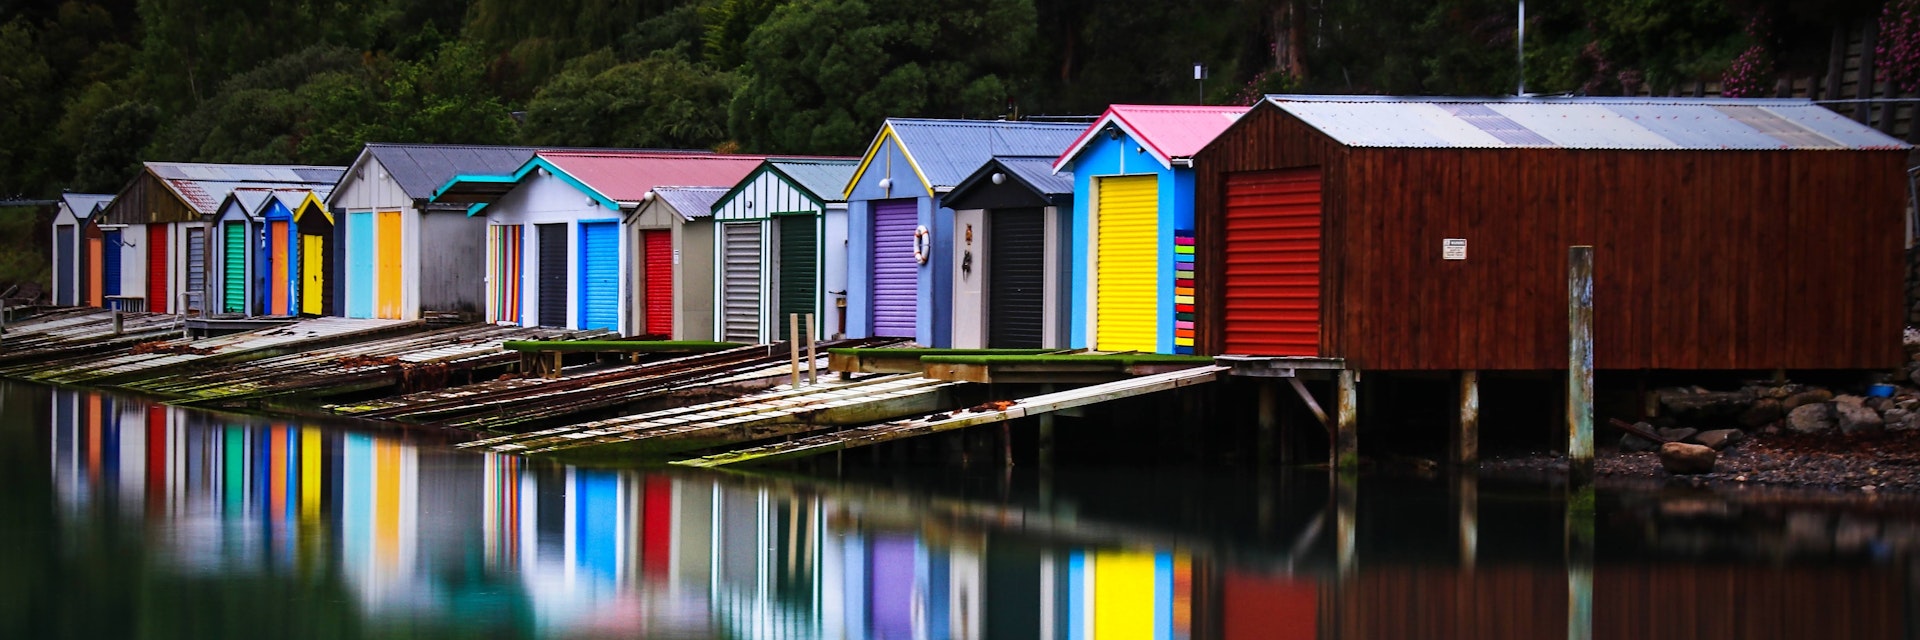 A calm, perfect morning capturing the colourful reflections of the duvauchelle Boat sheds